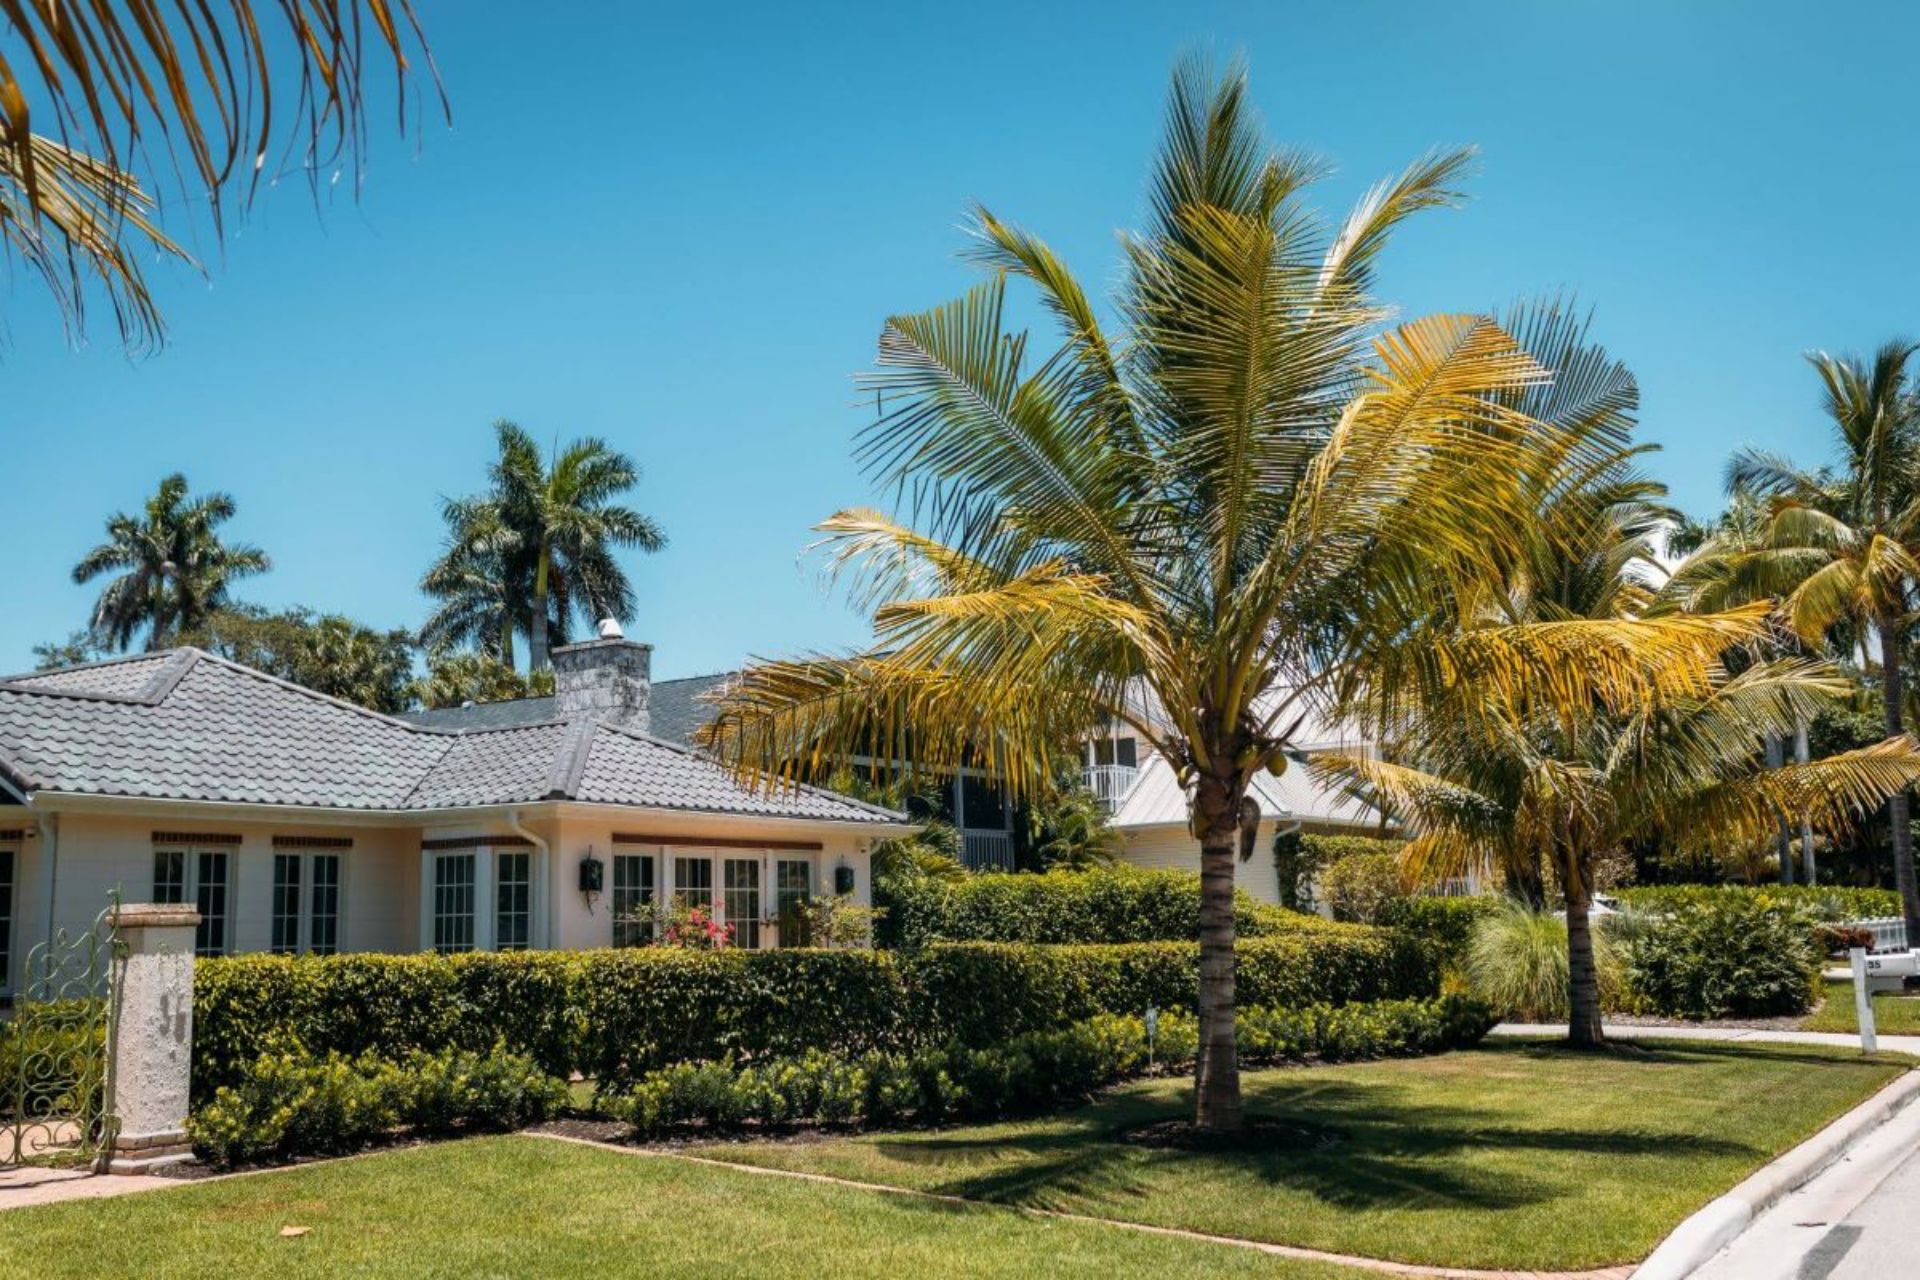 A palm tree in the yard of a house in Osprey, FL, showcasing the palm tree care services offered by GreenEdge.